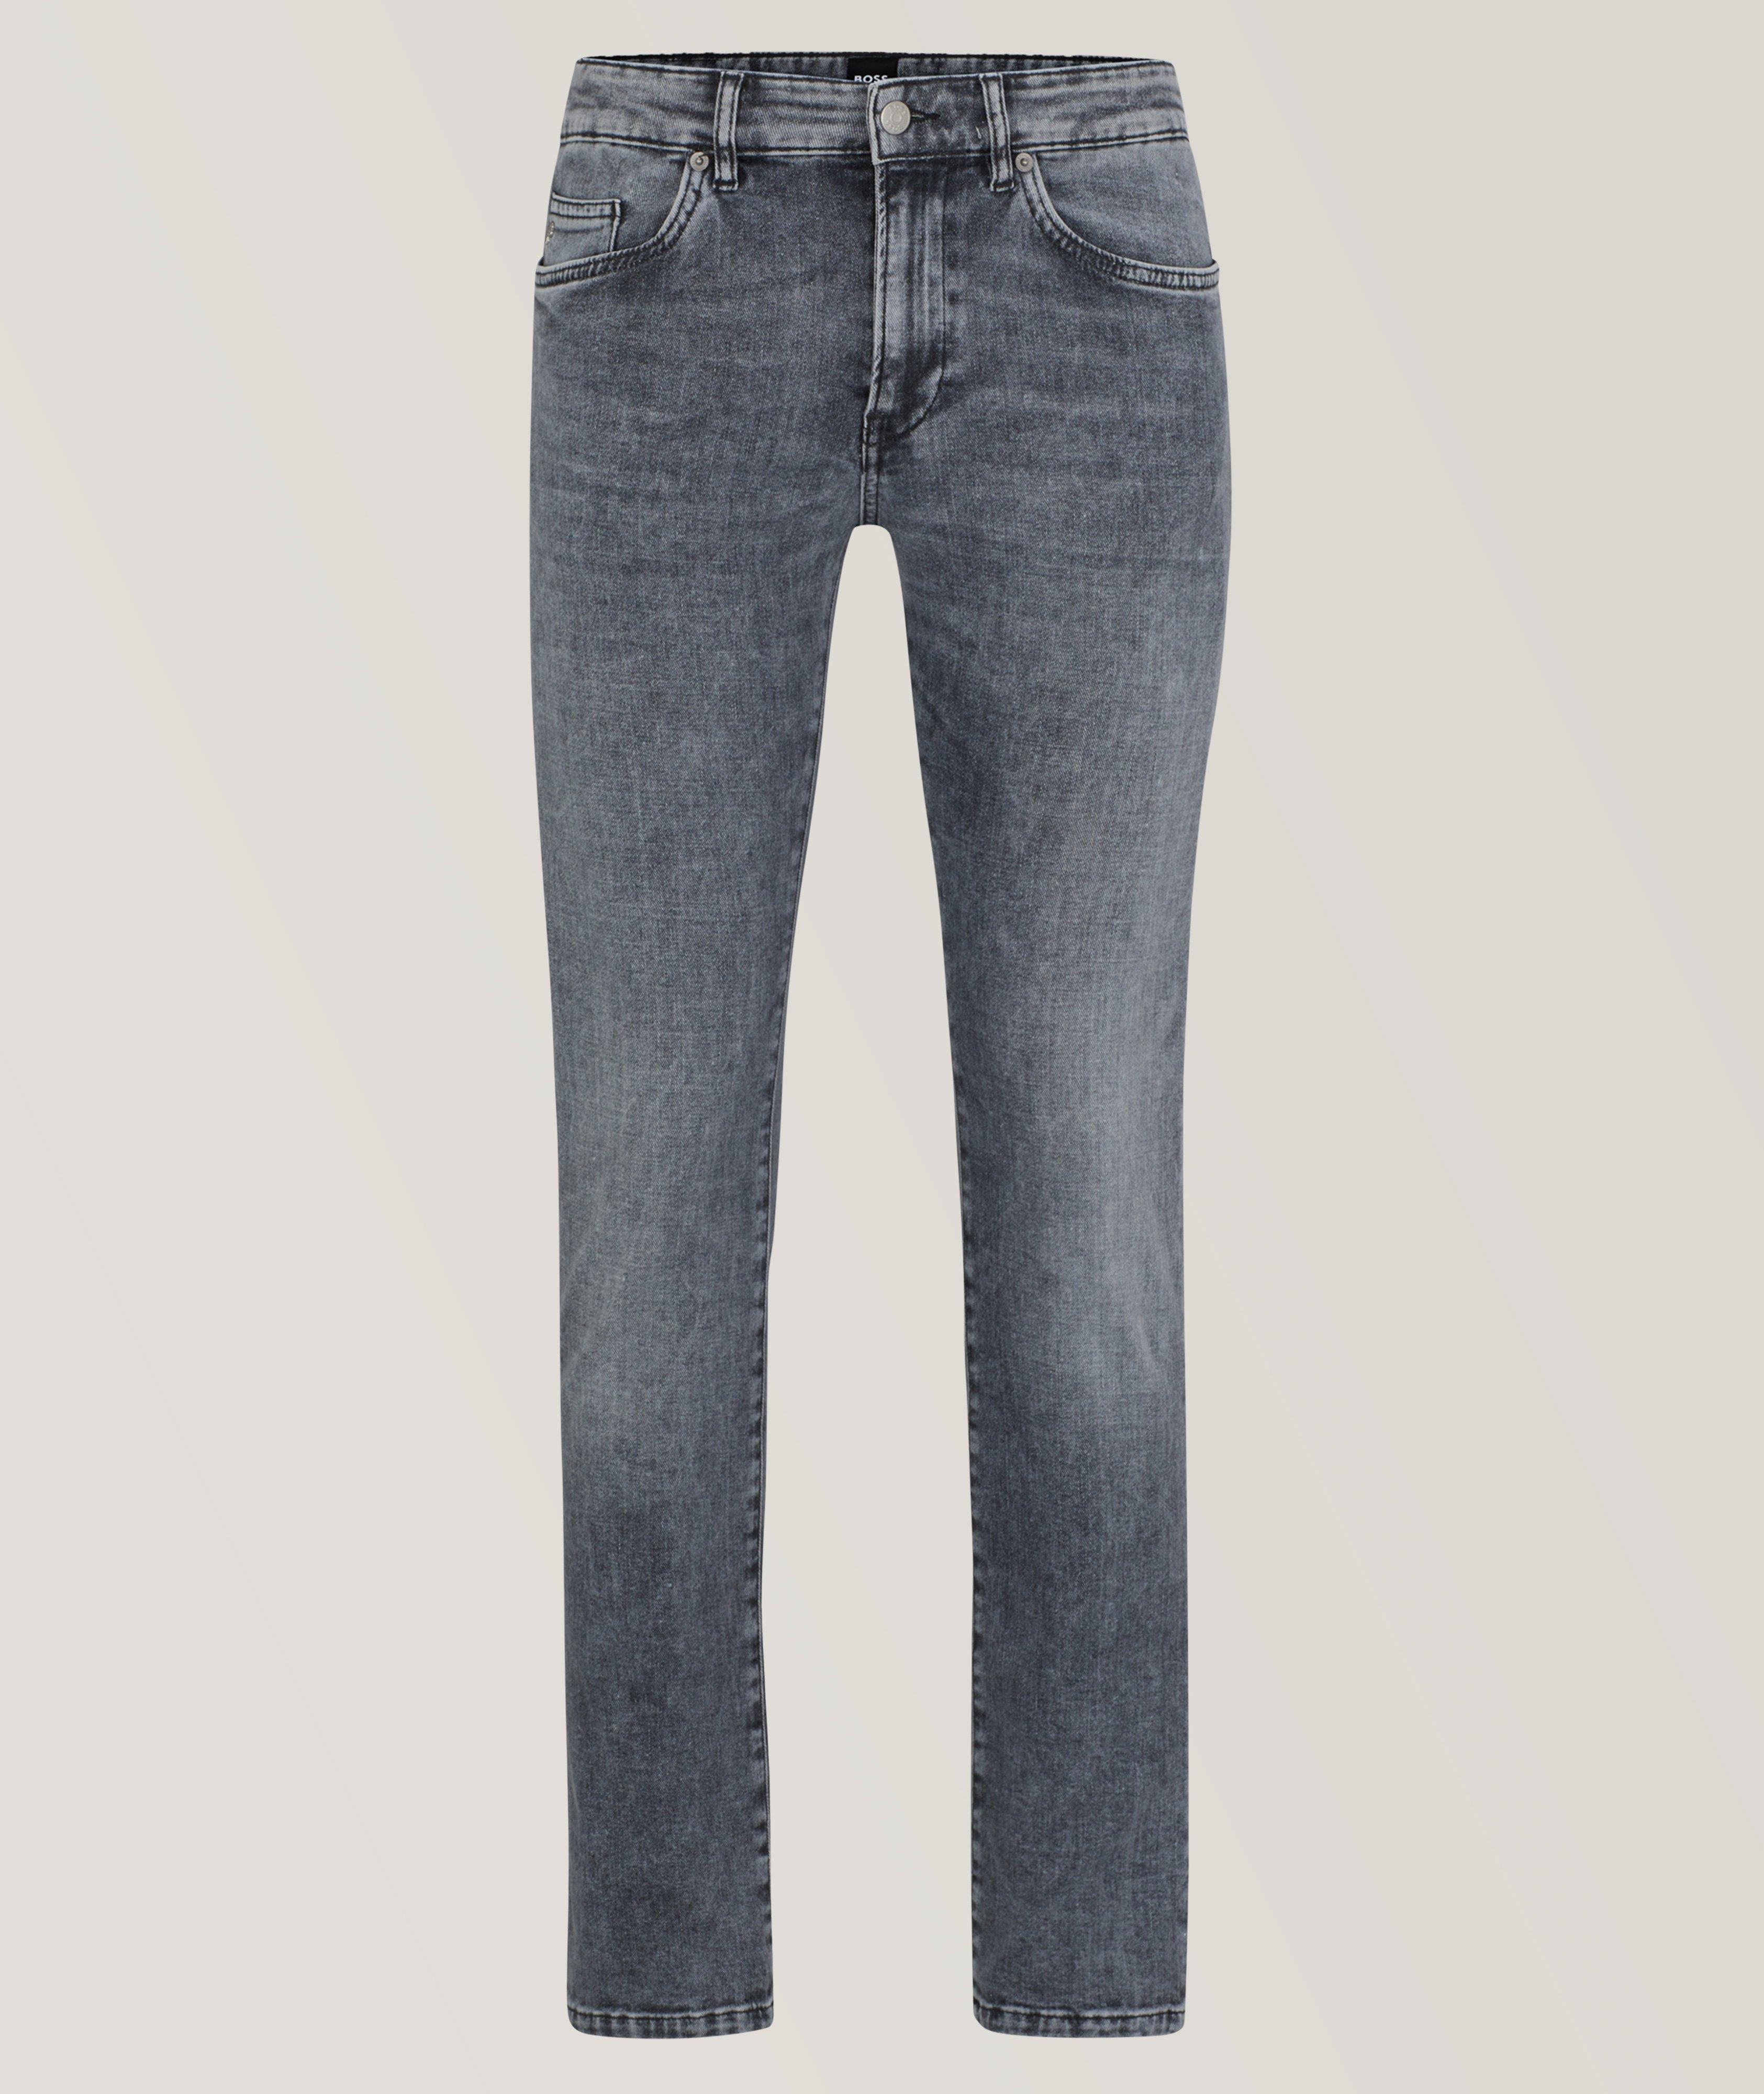 Slim-Fit Washed Stretch-Cotton Jeans image 0